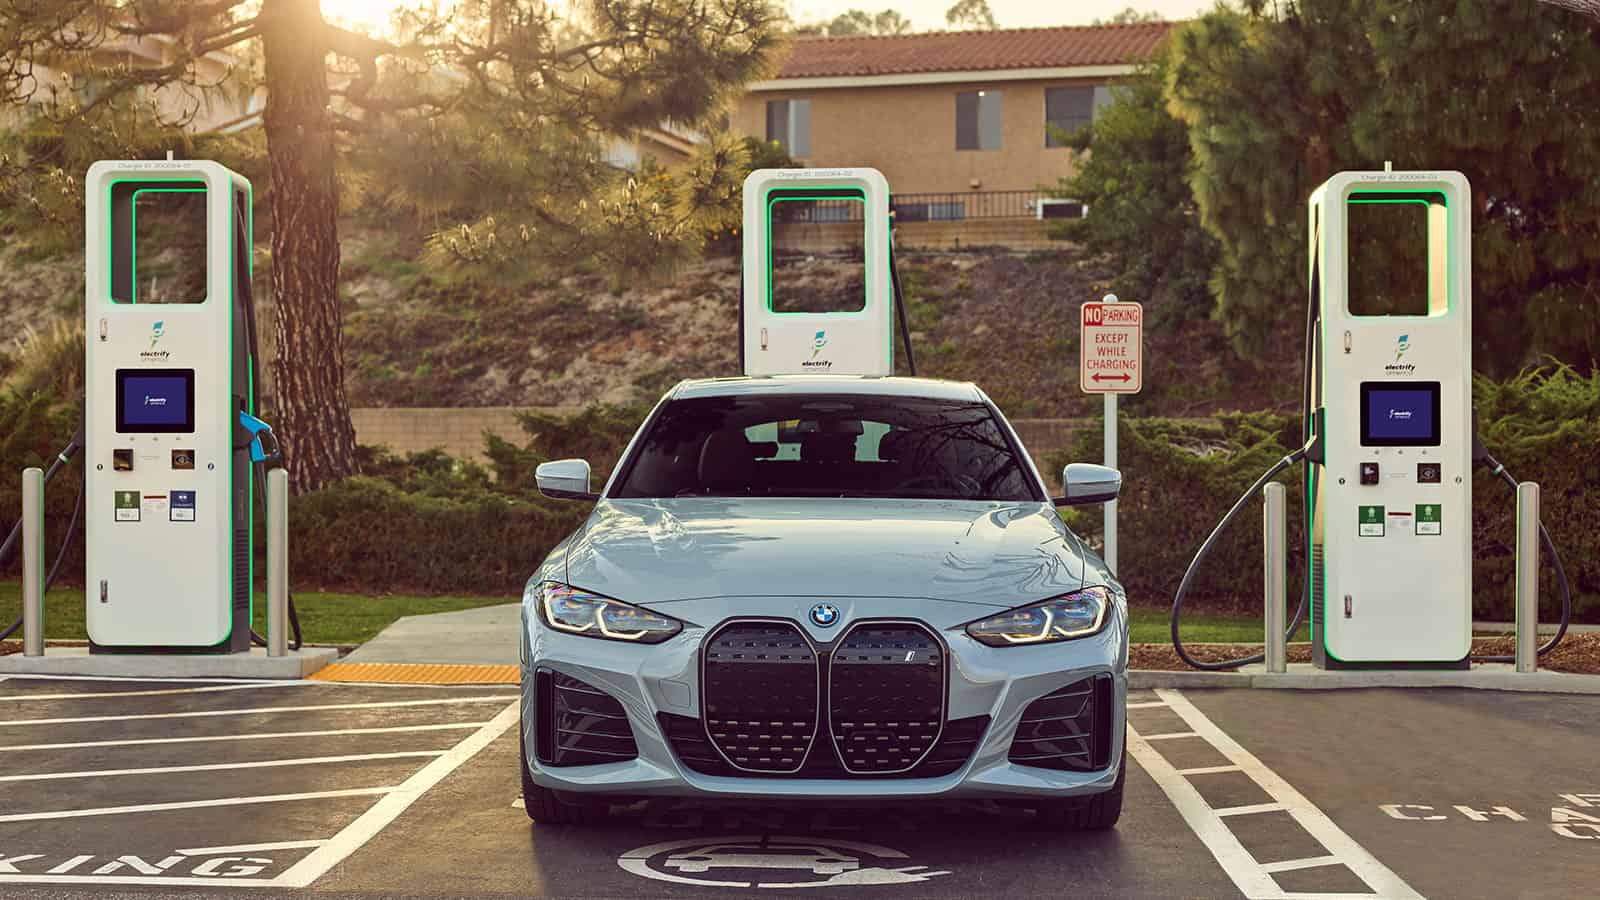 BMW EV charging in a parking lot